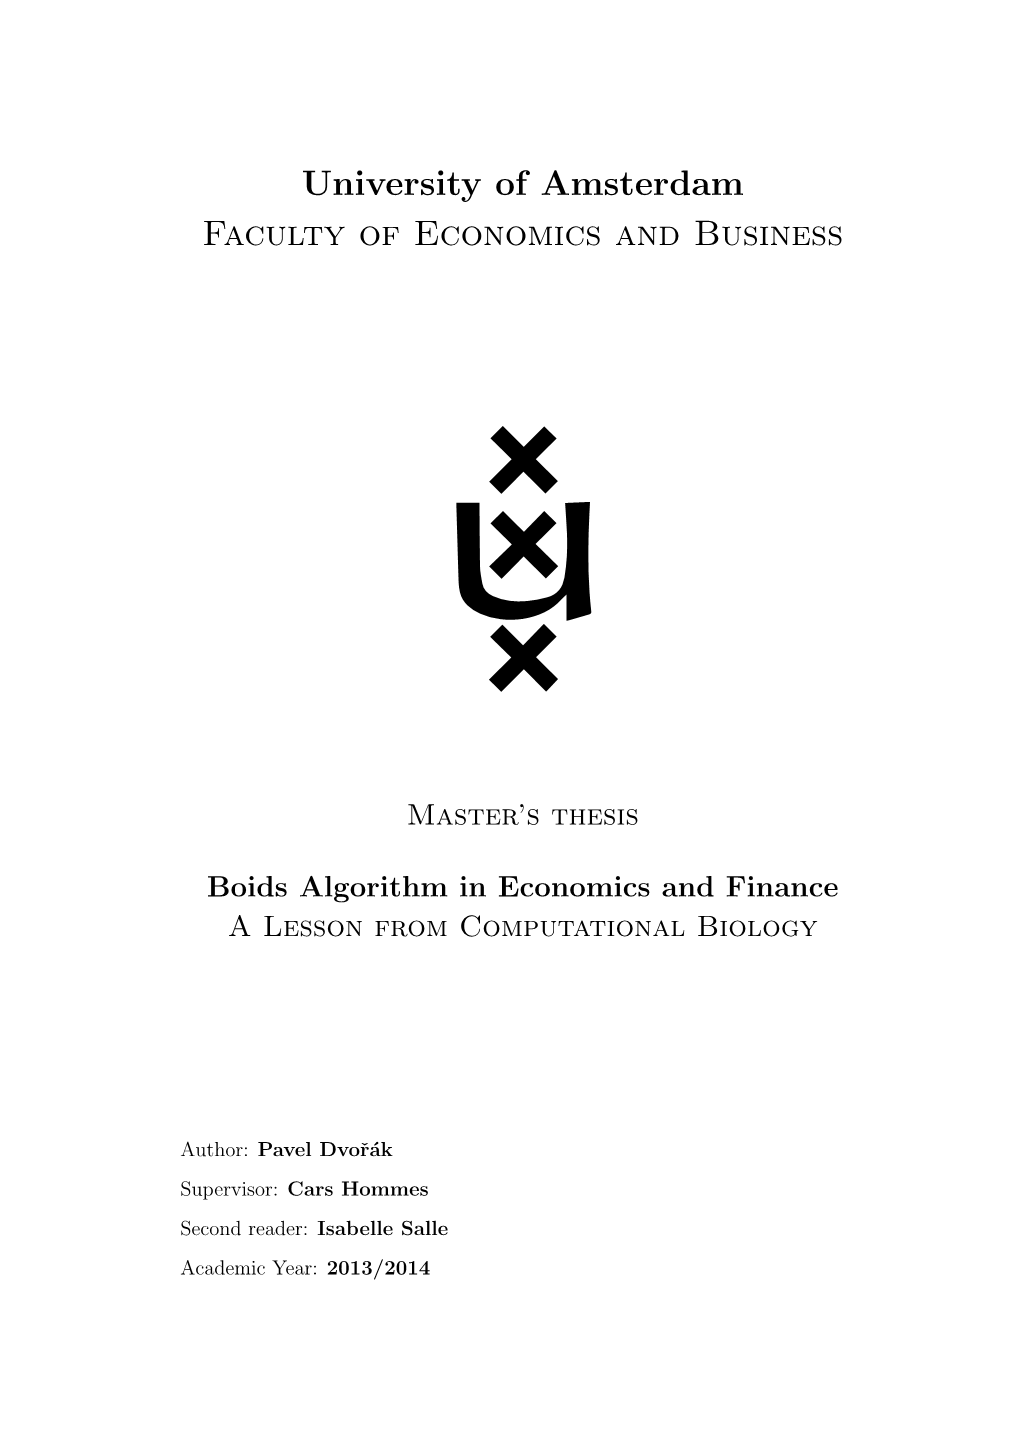 Boids Algorithm in Economics and Finance a Lesson from Computational Biology